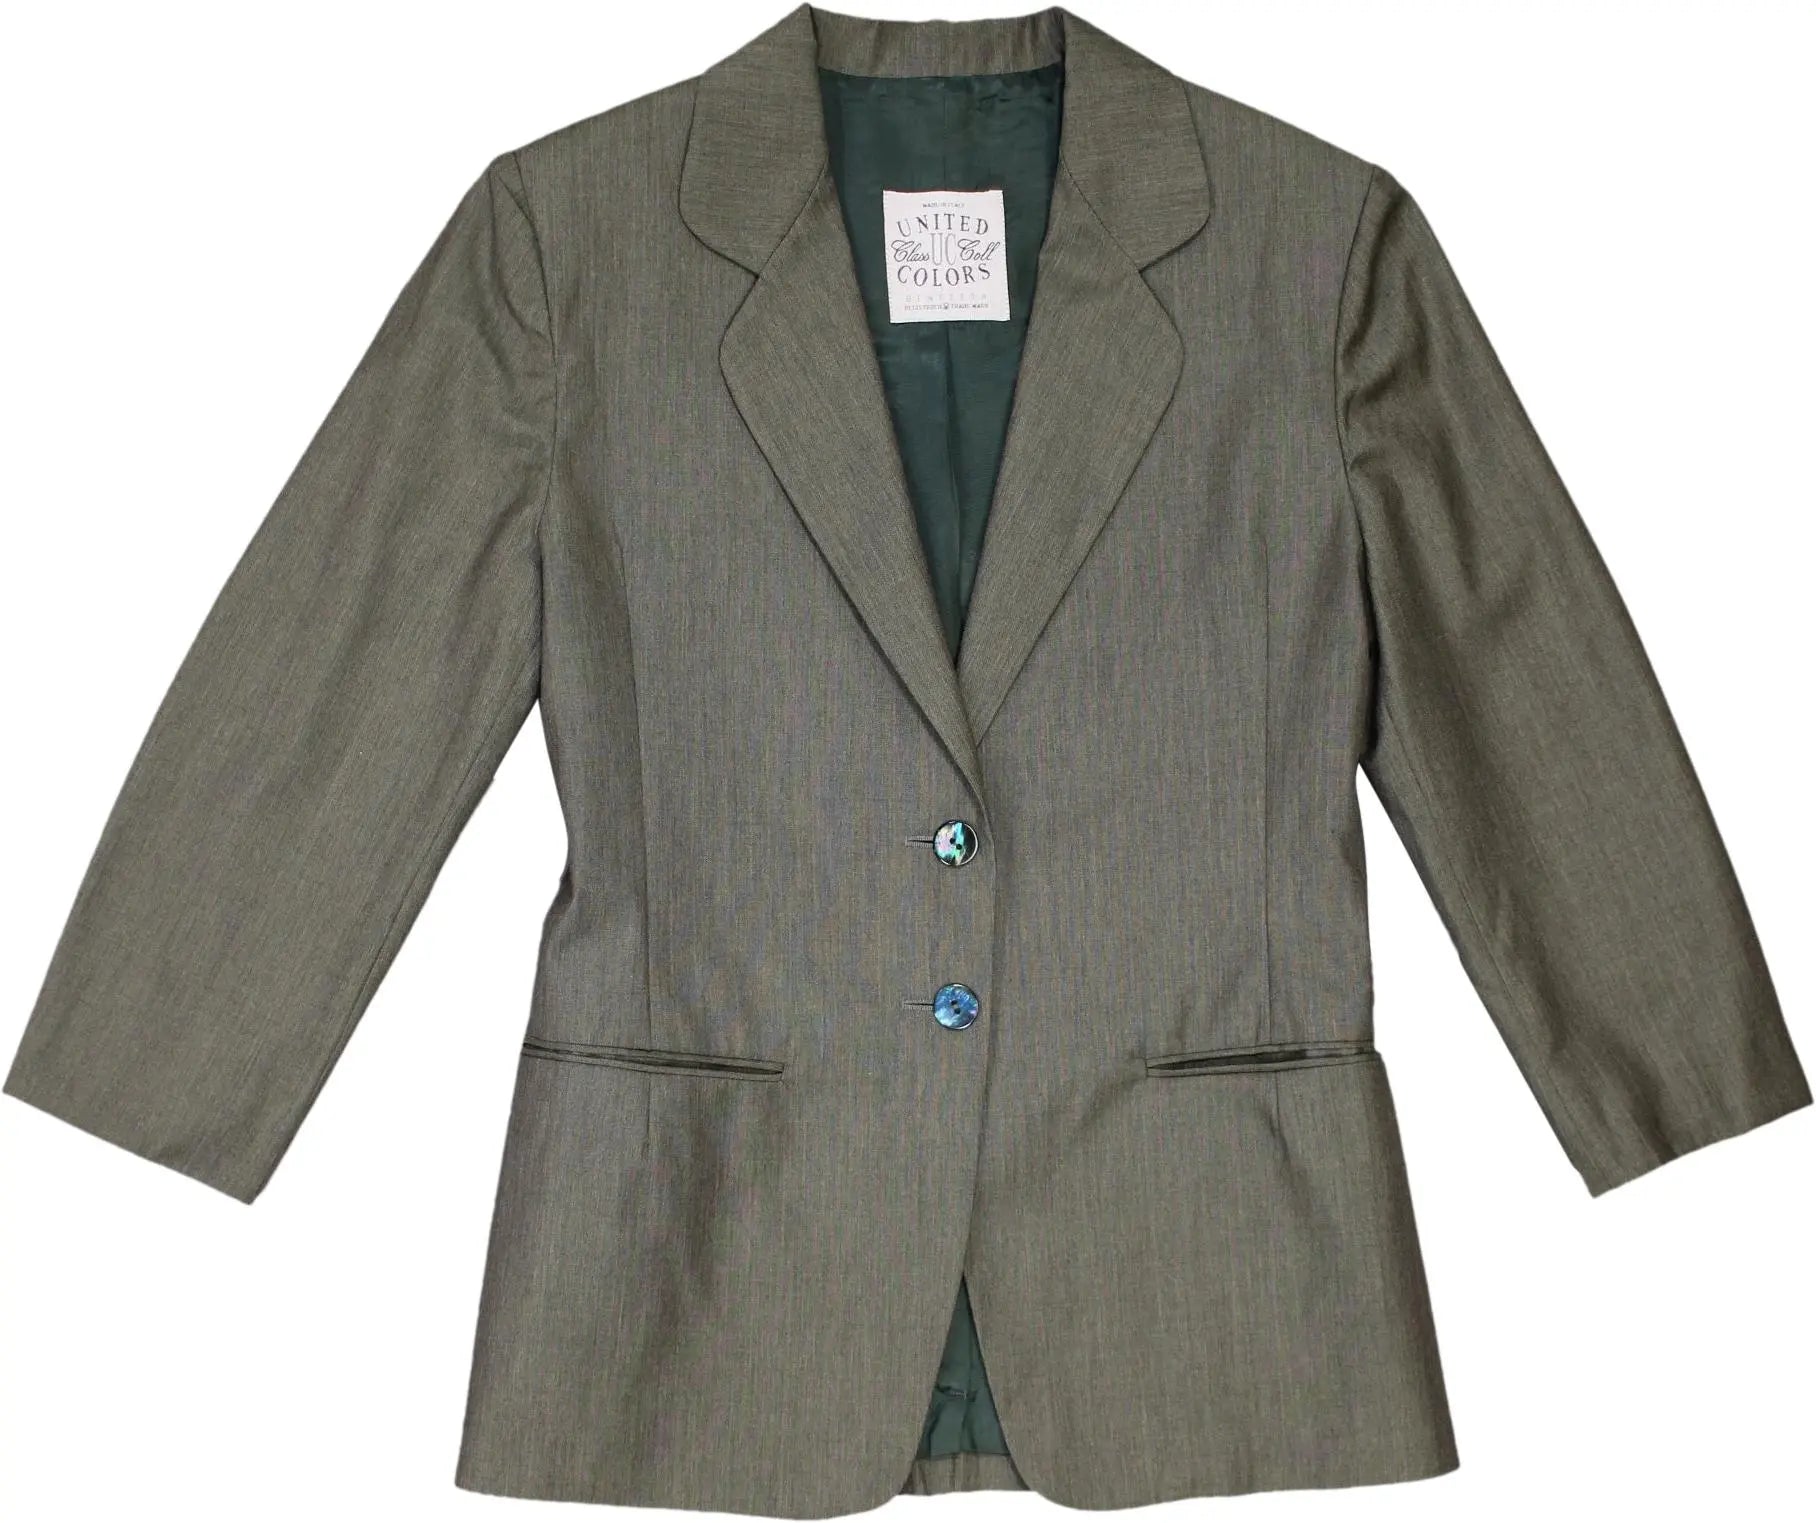 United Colors of Benetton - Pure Wool Blazer by United Colors of Benetton- ThriftTale.com - Vintage and second handclothing